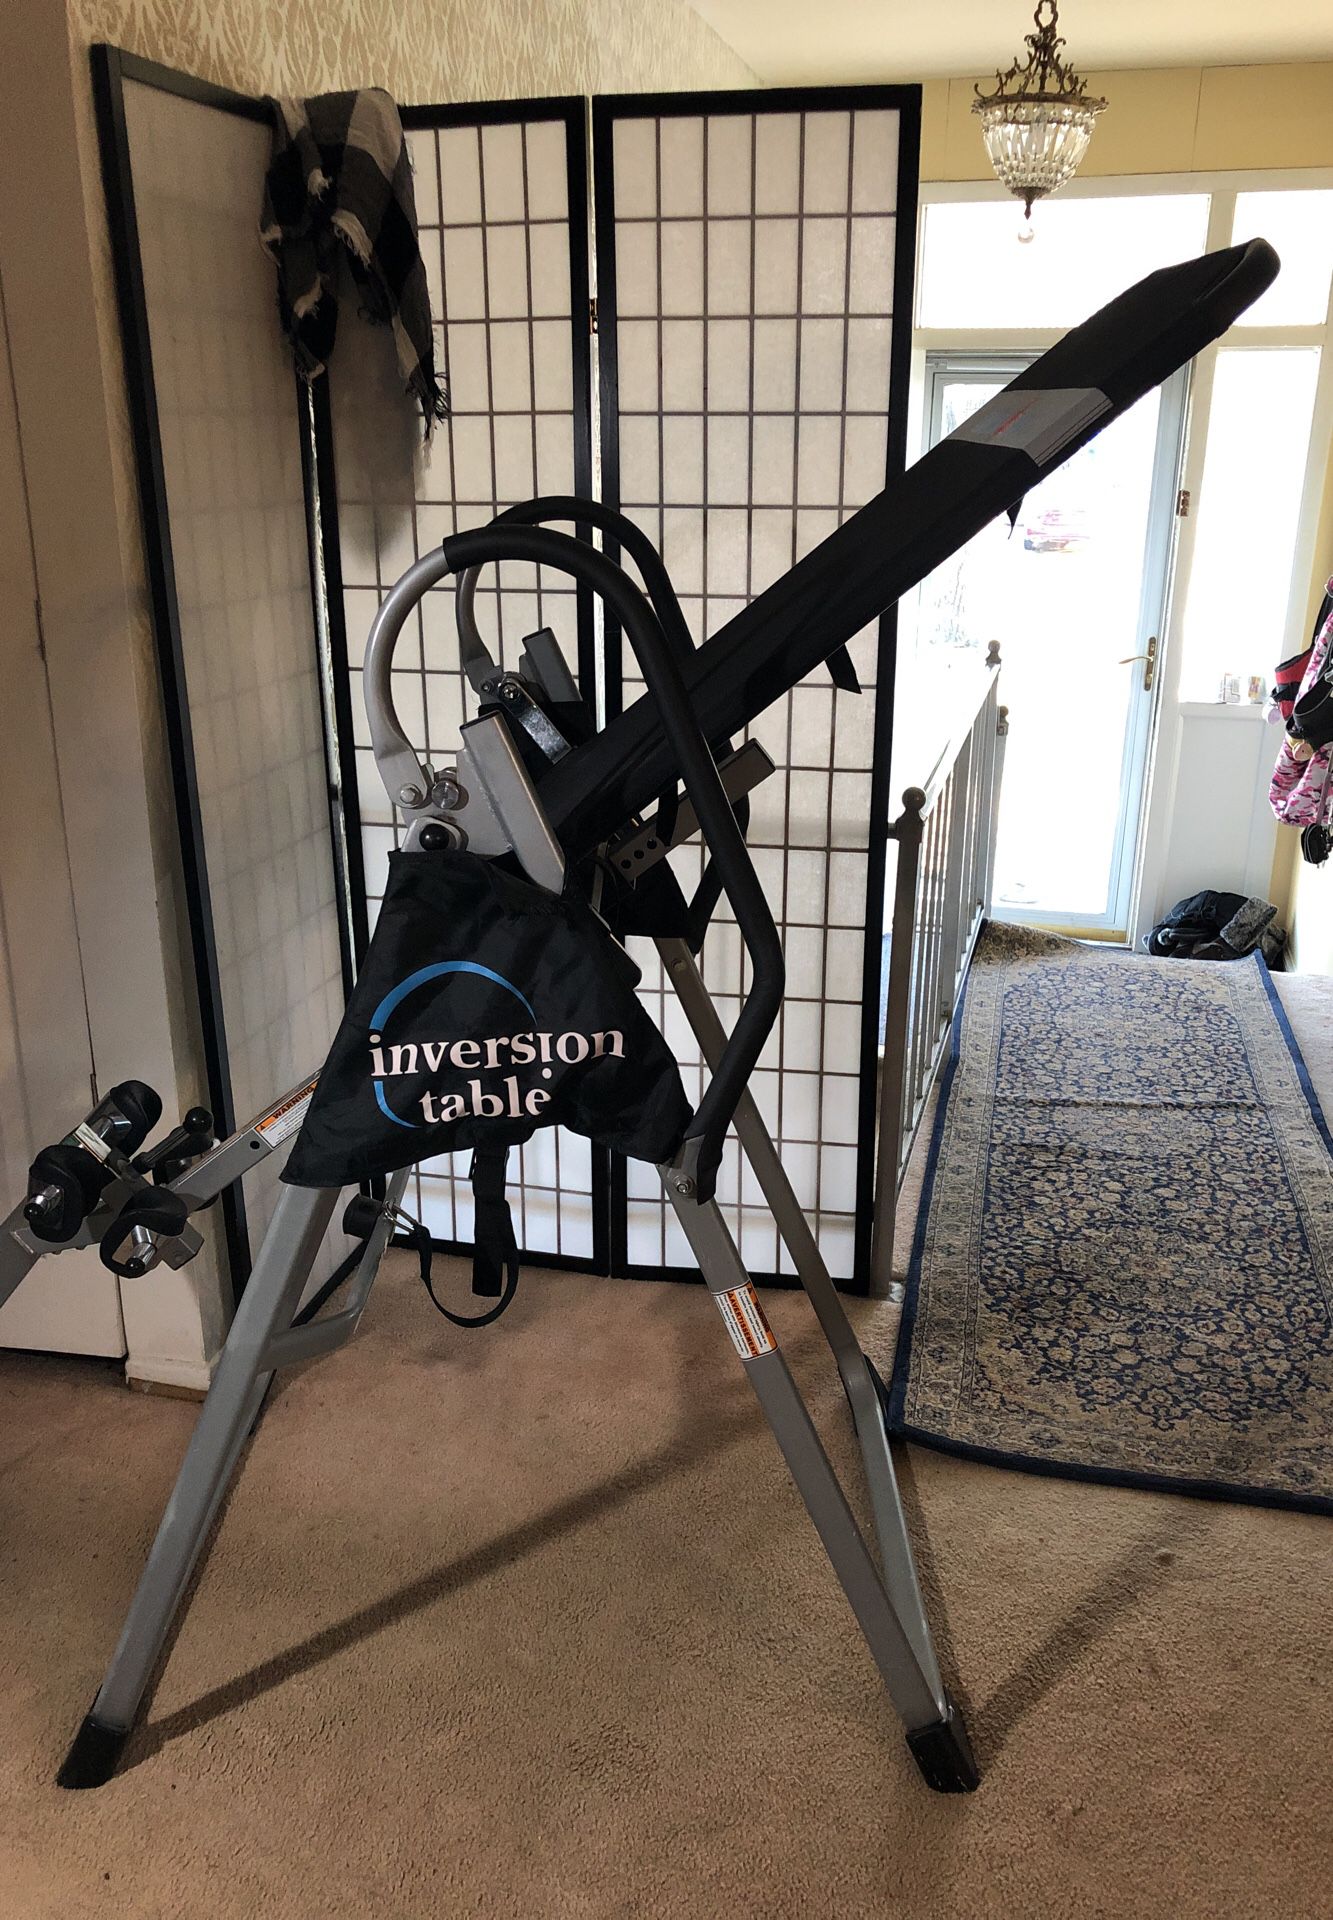 Inversion table by Ironman